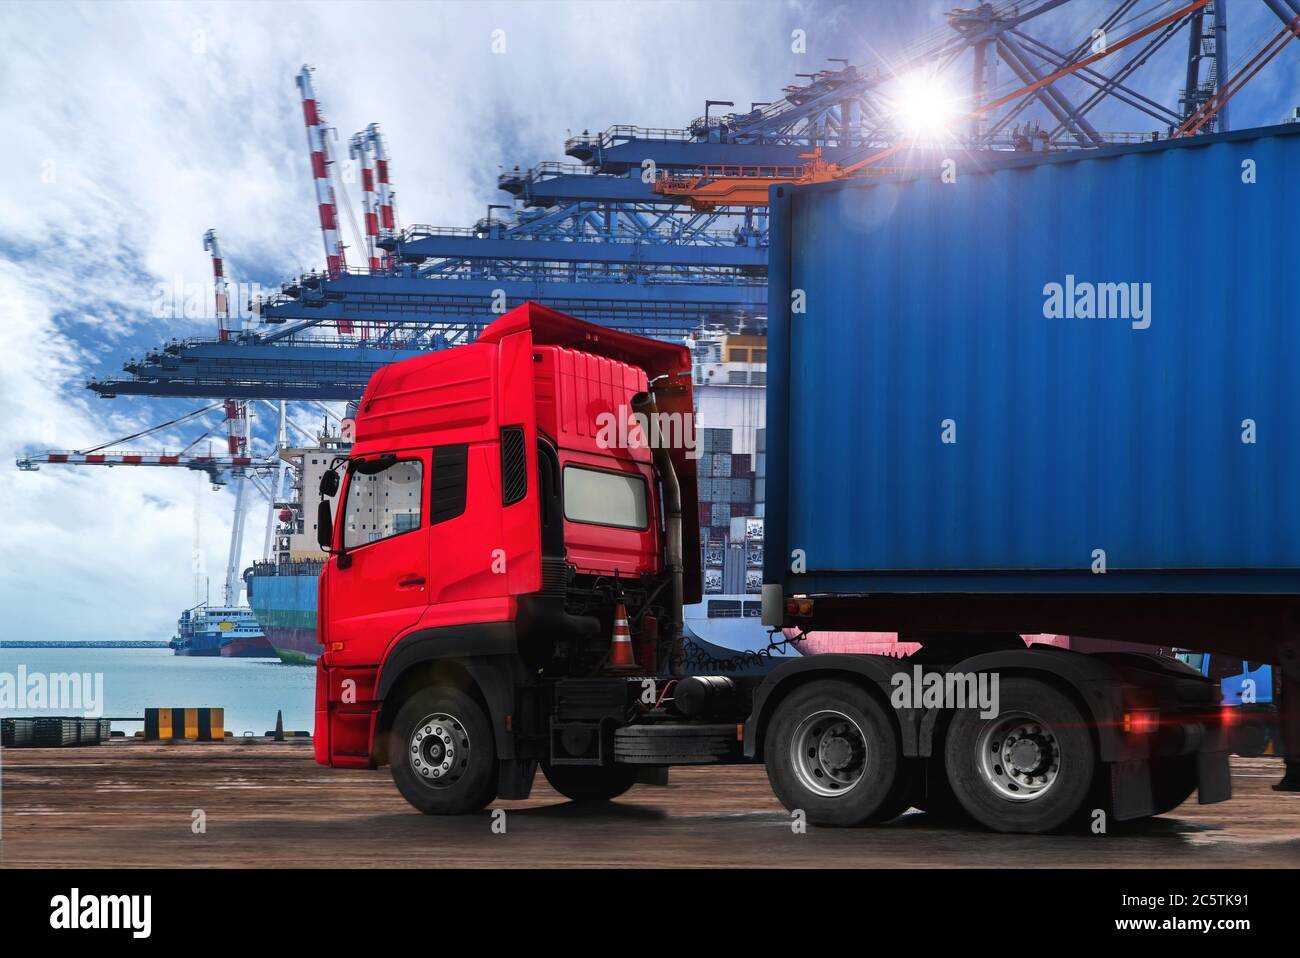 Truck transportation,import,export logistic industrial with beautiful sky and shipyard background,Thailand Stock Photo